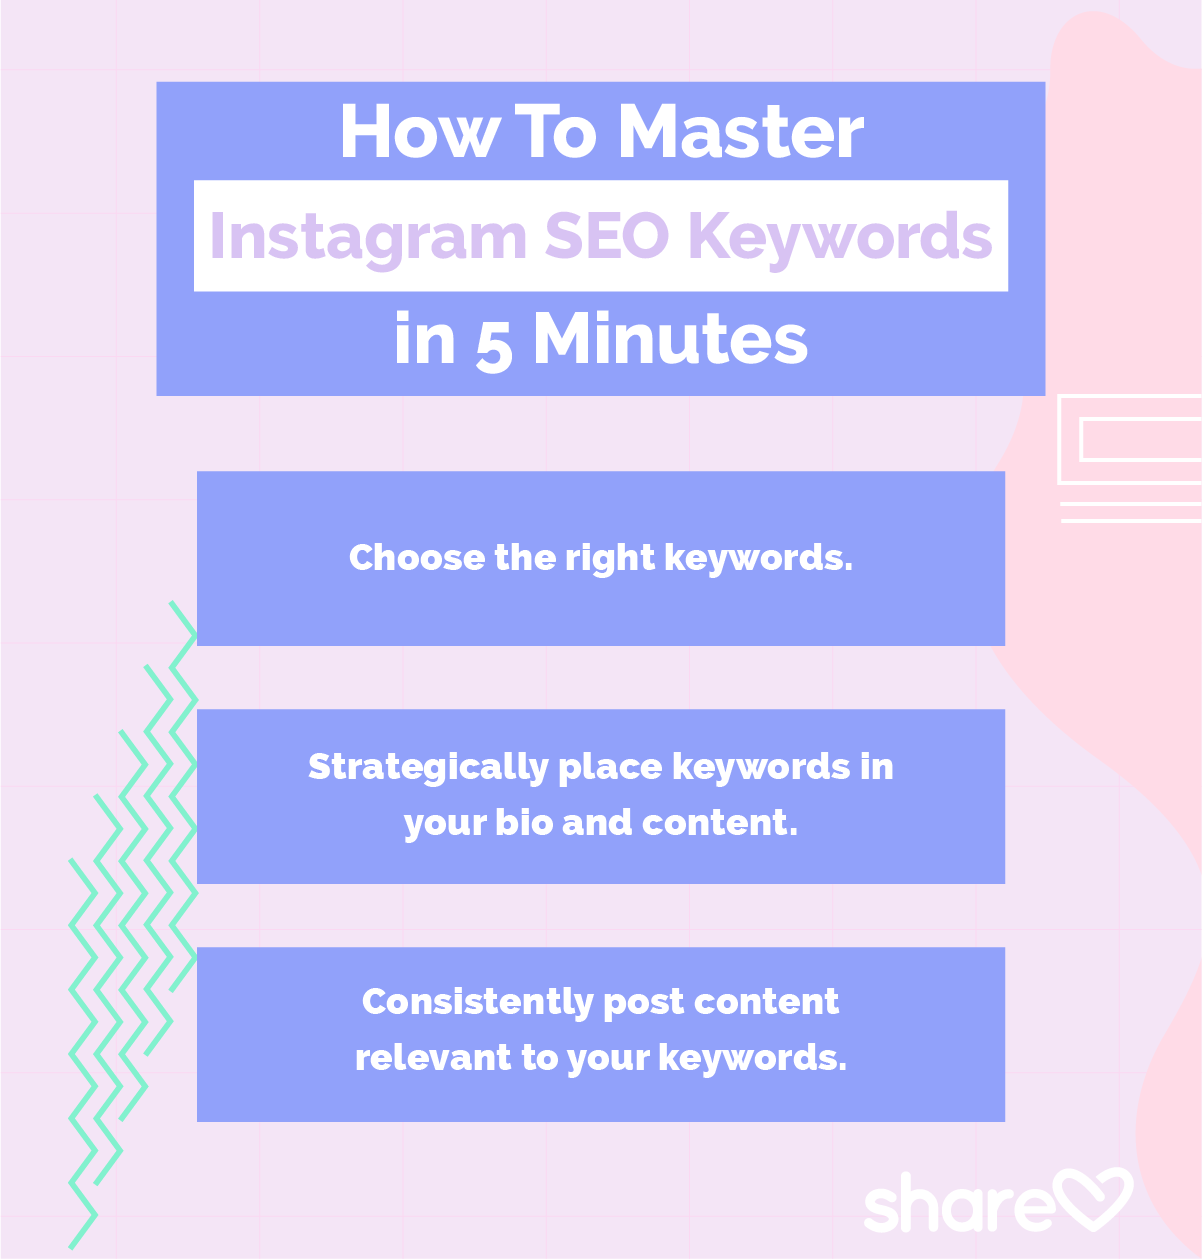 How To Master Instagram SEO Keywords In 5 Minutes